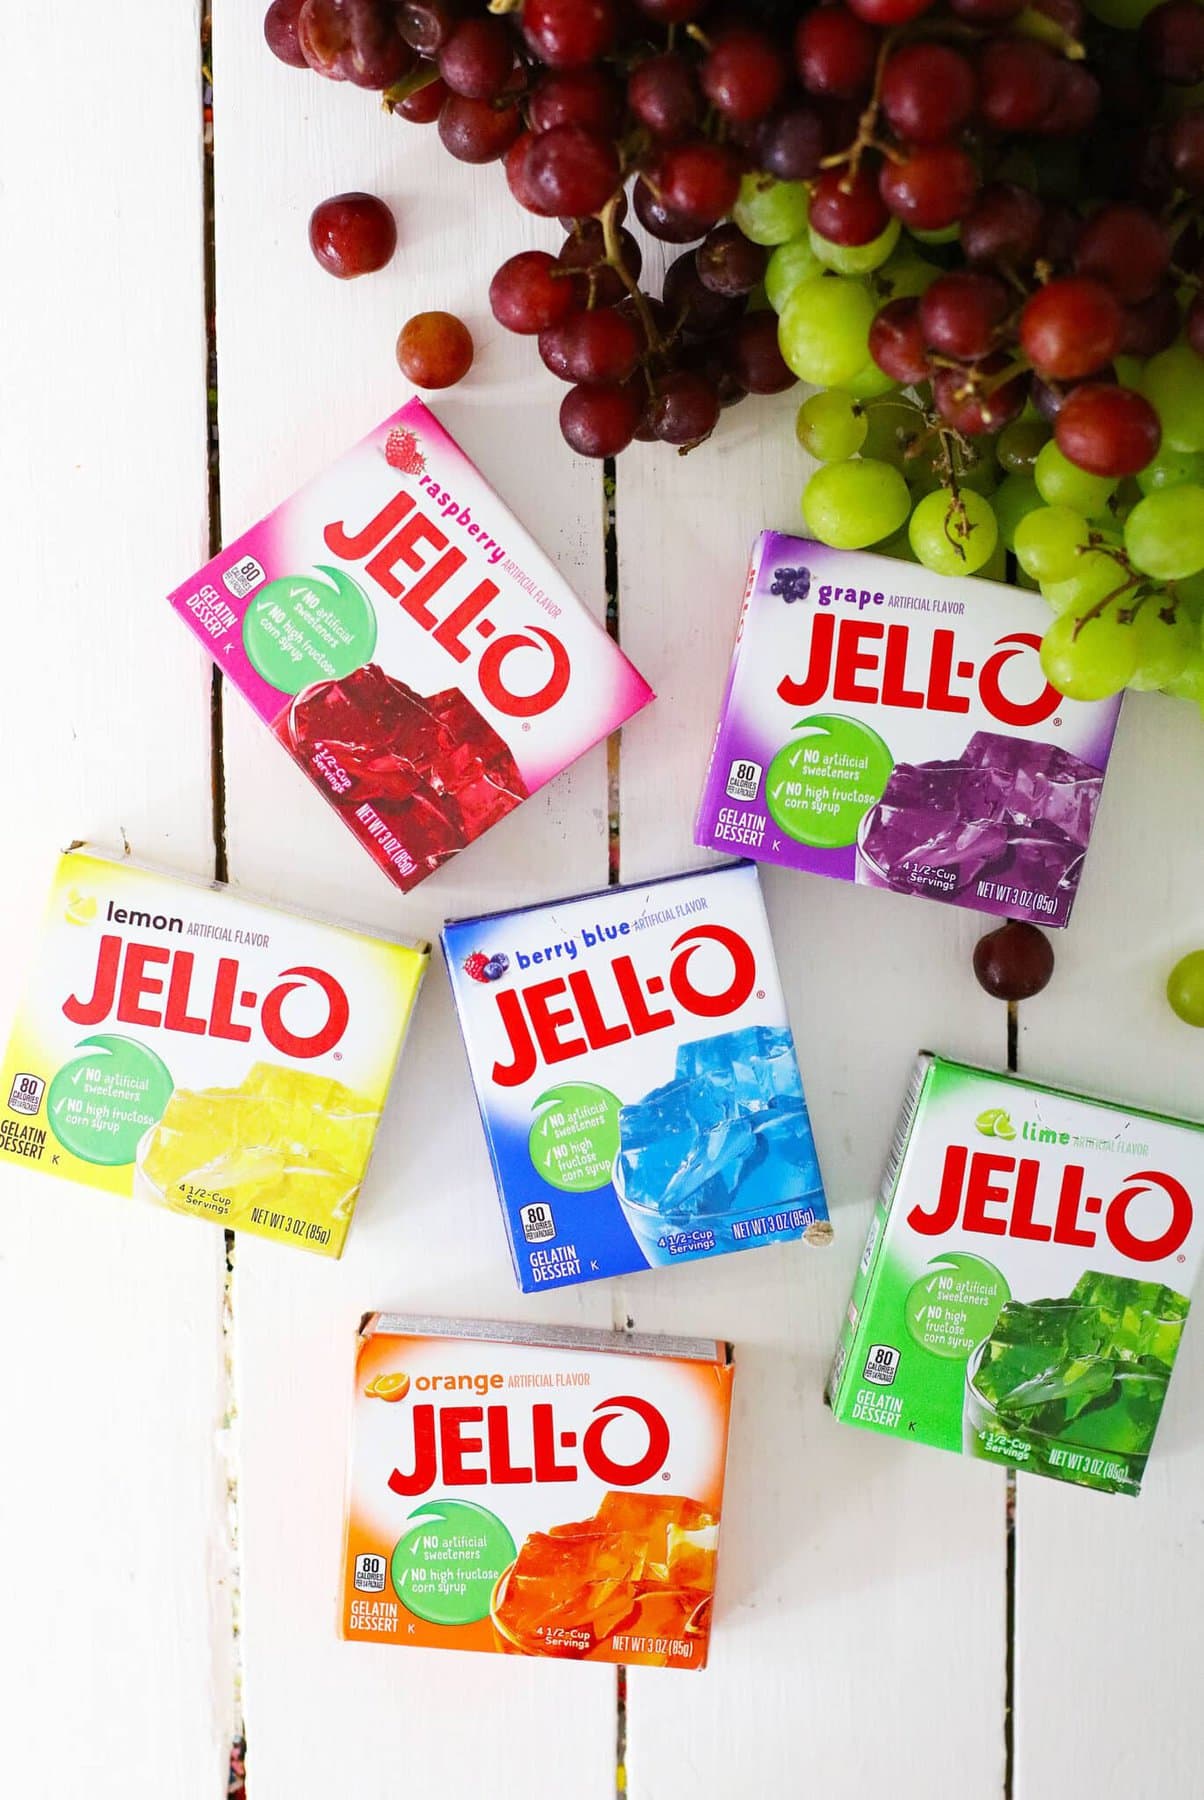 The boxes of jello on a table.